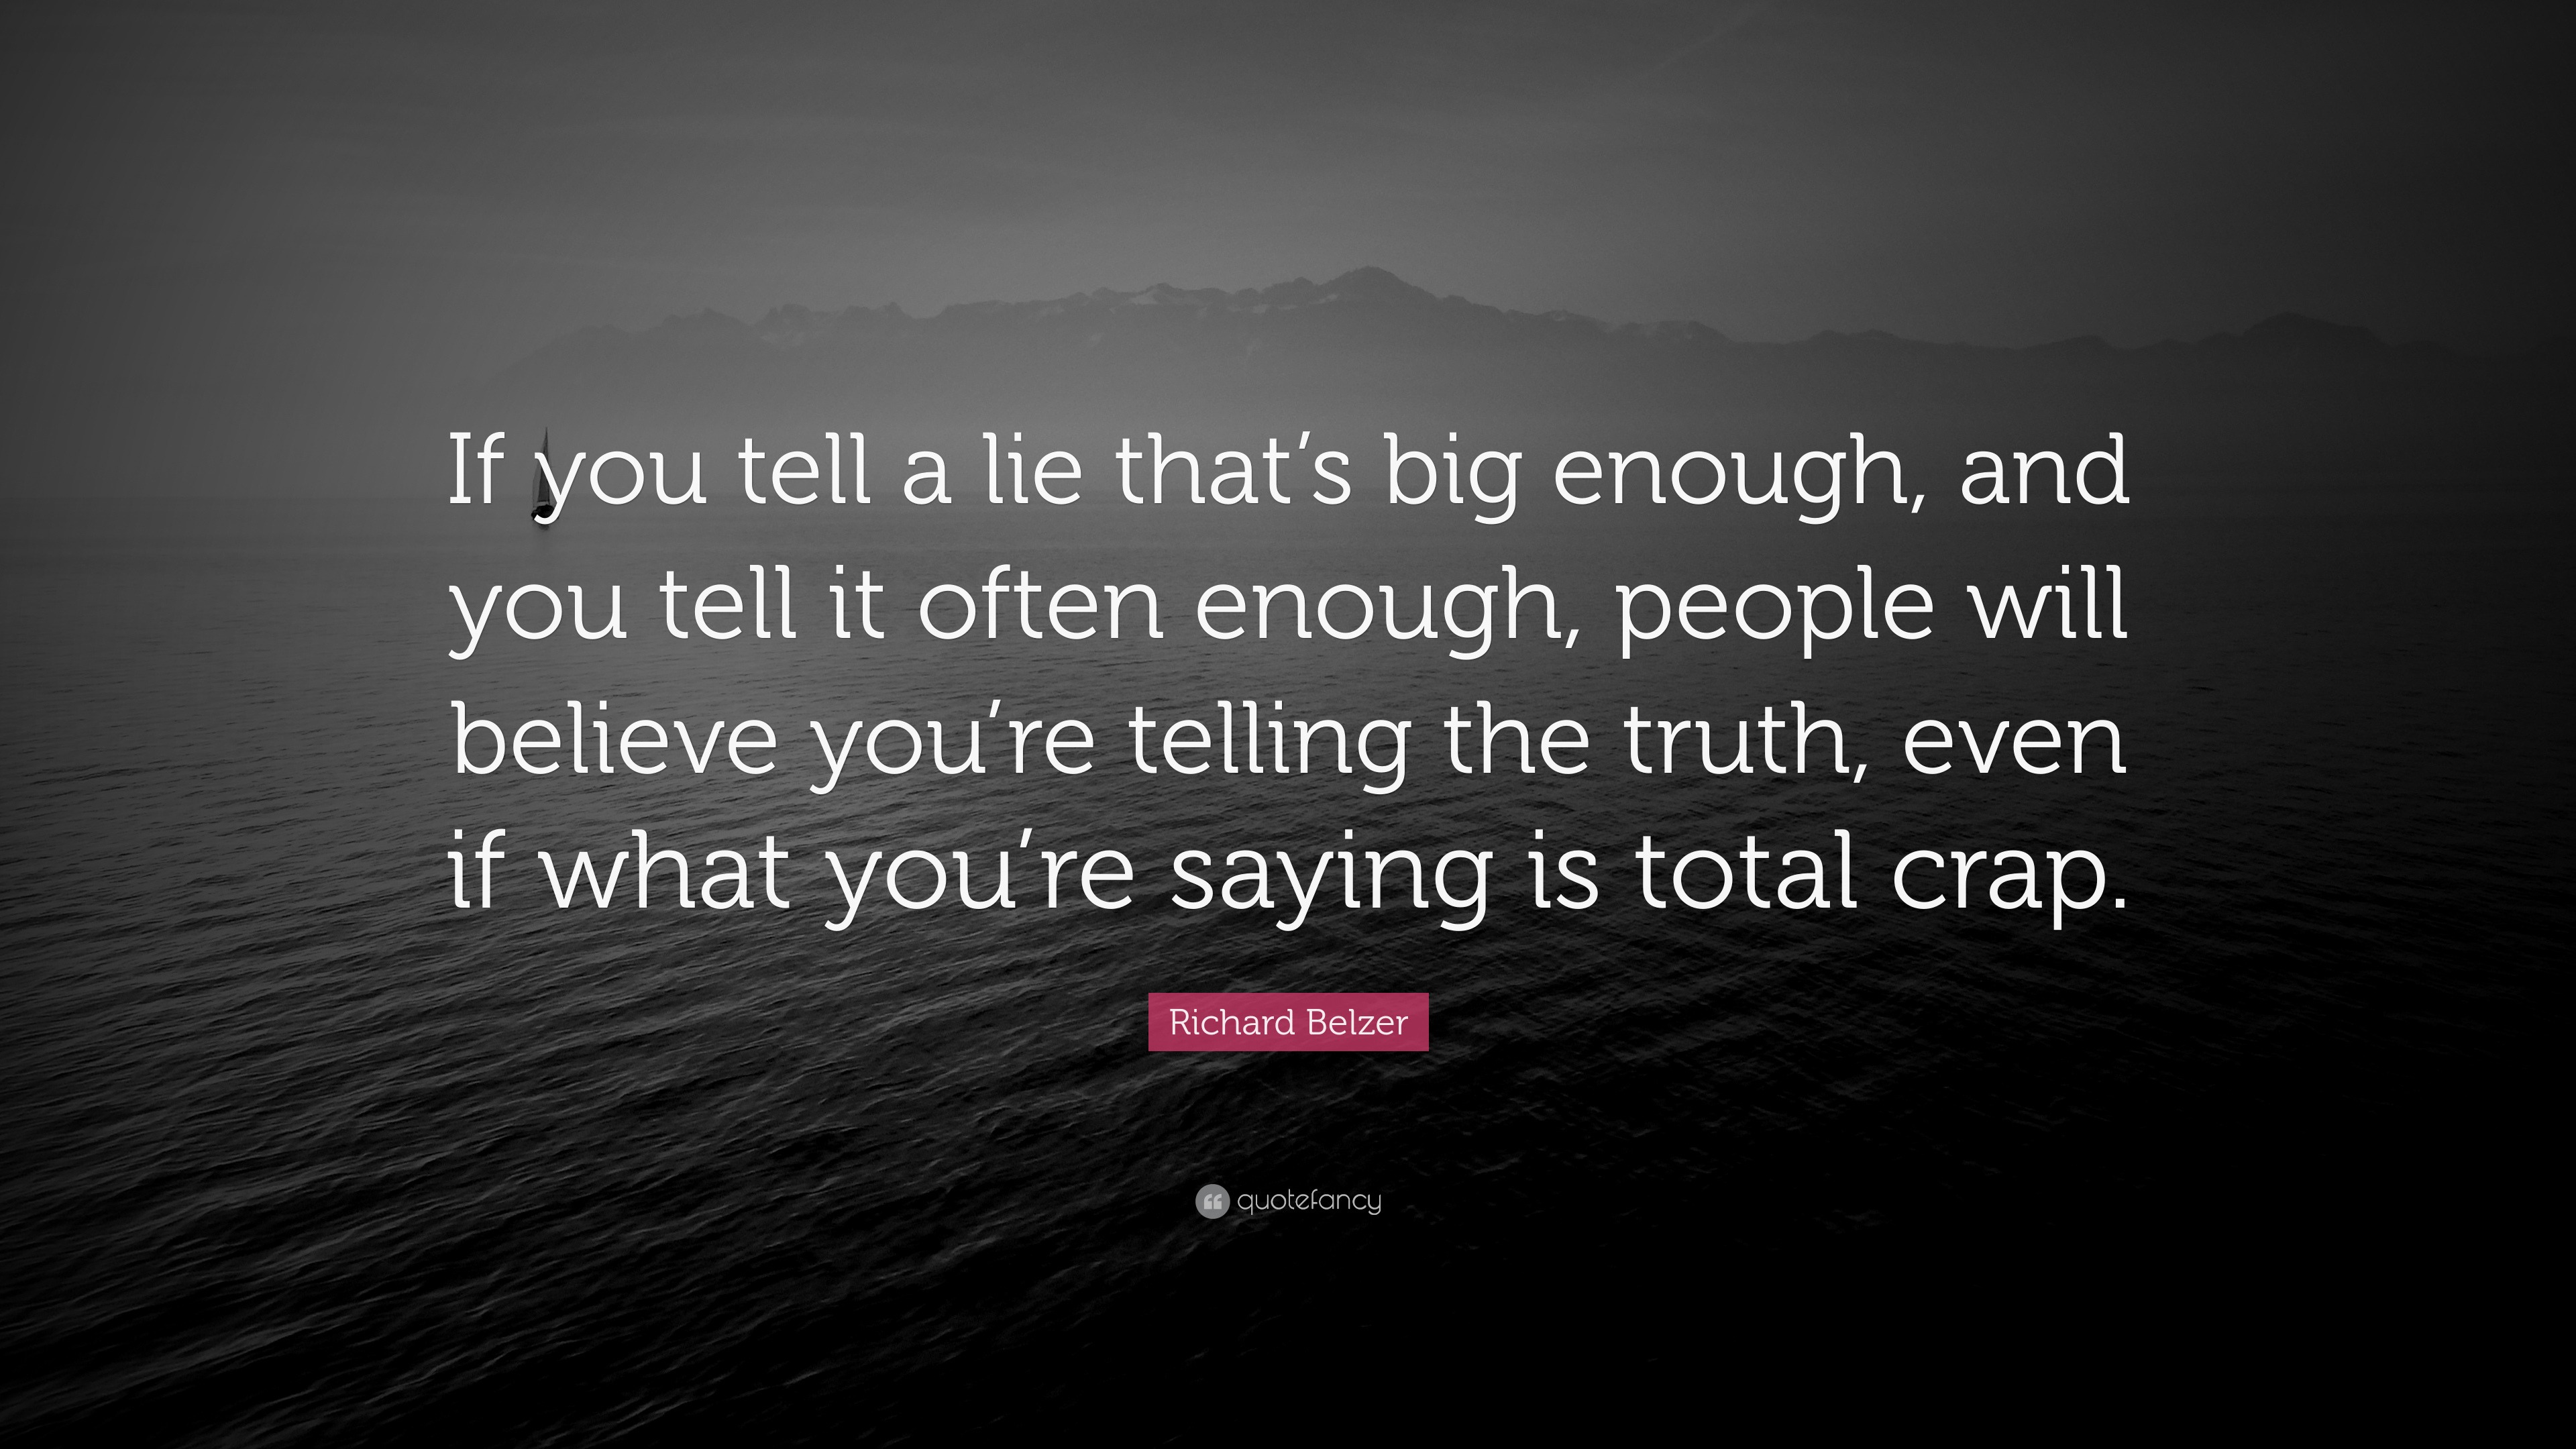 https://quotefancy.com/media/wallpaper/3840x2160/4565195-Richard-Belzer-Quote-If-you-tell-a-lie-that-s-big-enough-and-you.jpg